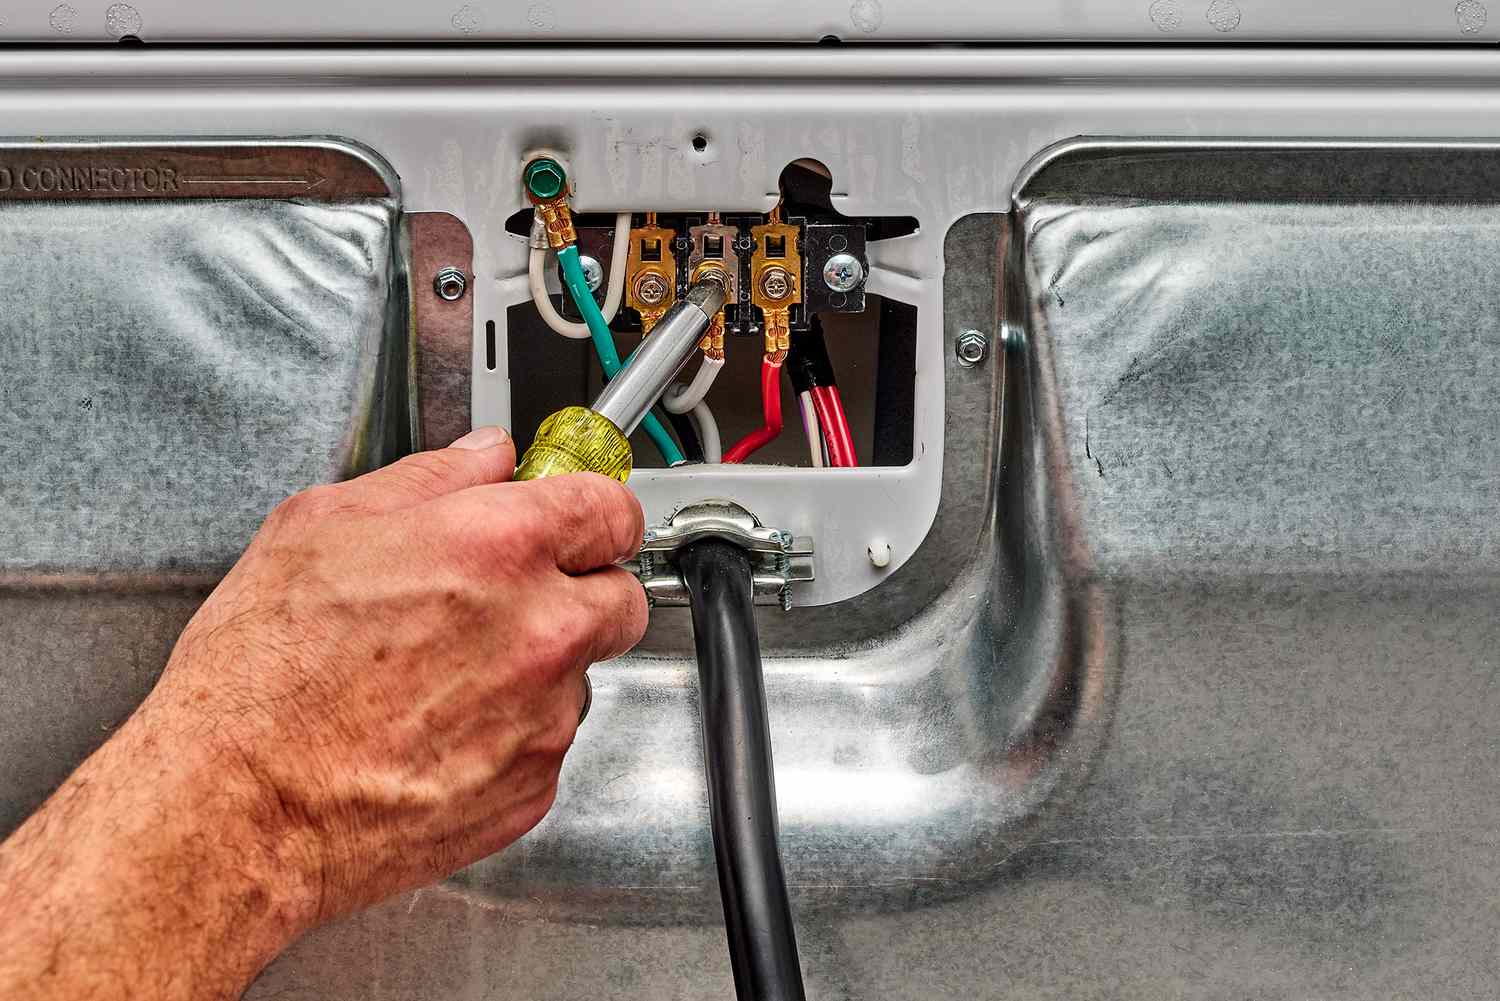 How To Hook Up An Electric Dryer